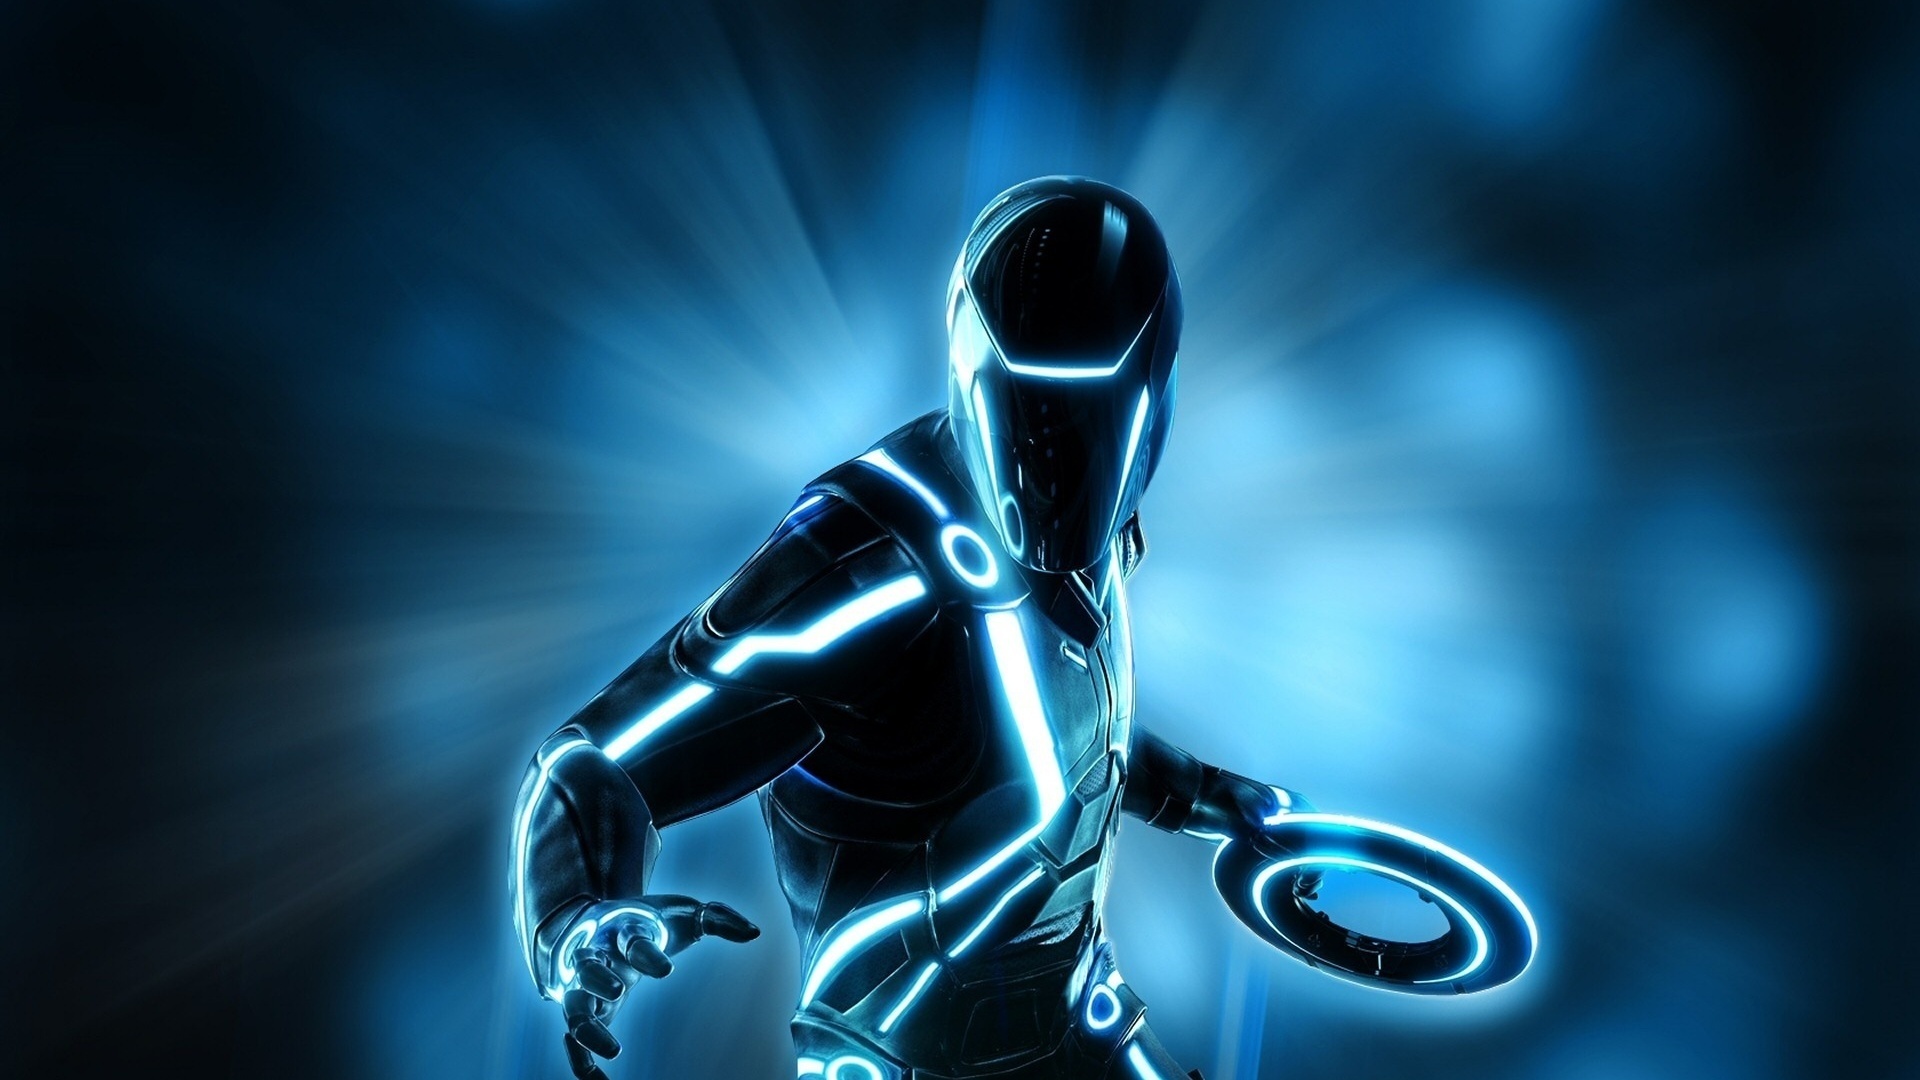 Tron Hd Wallpaper - Widescreen HD Wallpapers - Page 3 of 4